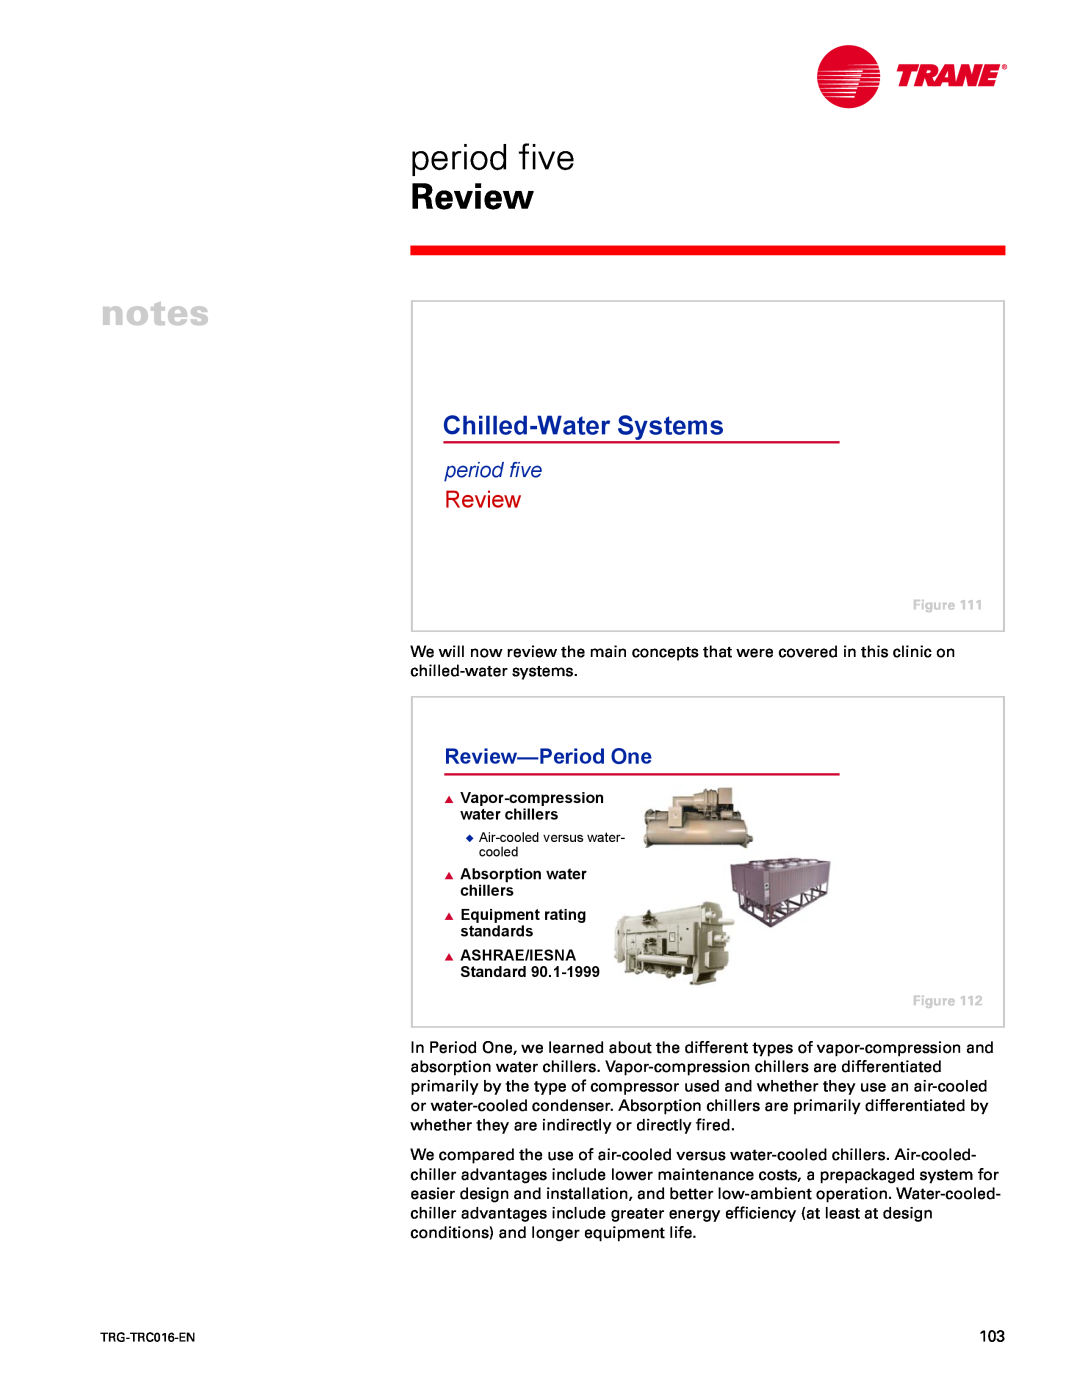 Trane TRG-TRC016-EN manual period five, Review—PeriodOne, notes, Chilled-WaterSystems, Vapor-compressionwater chillers 